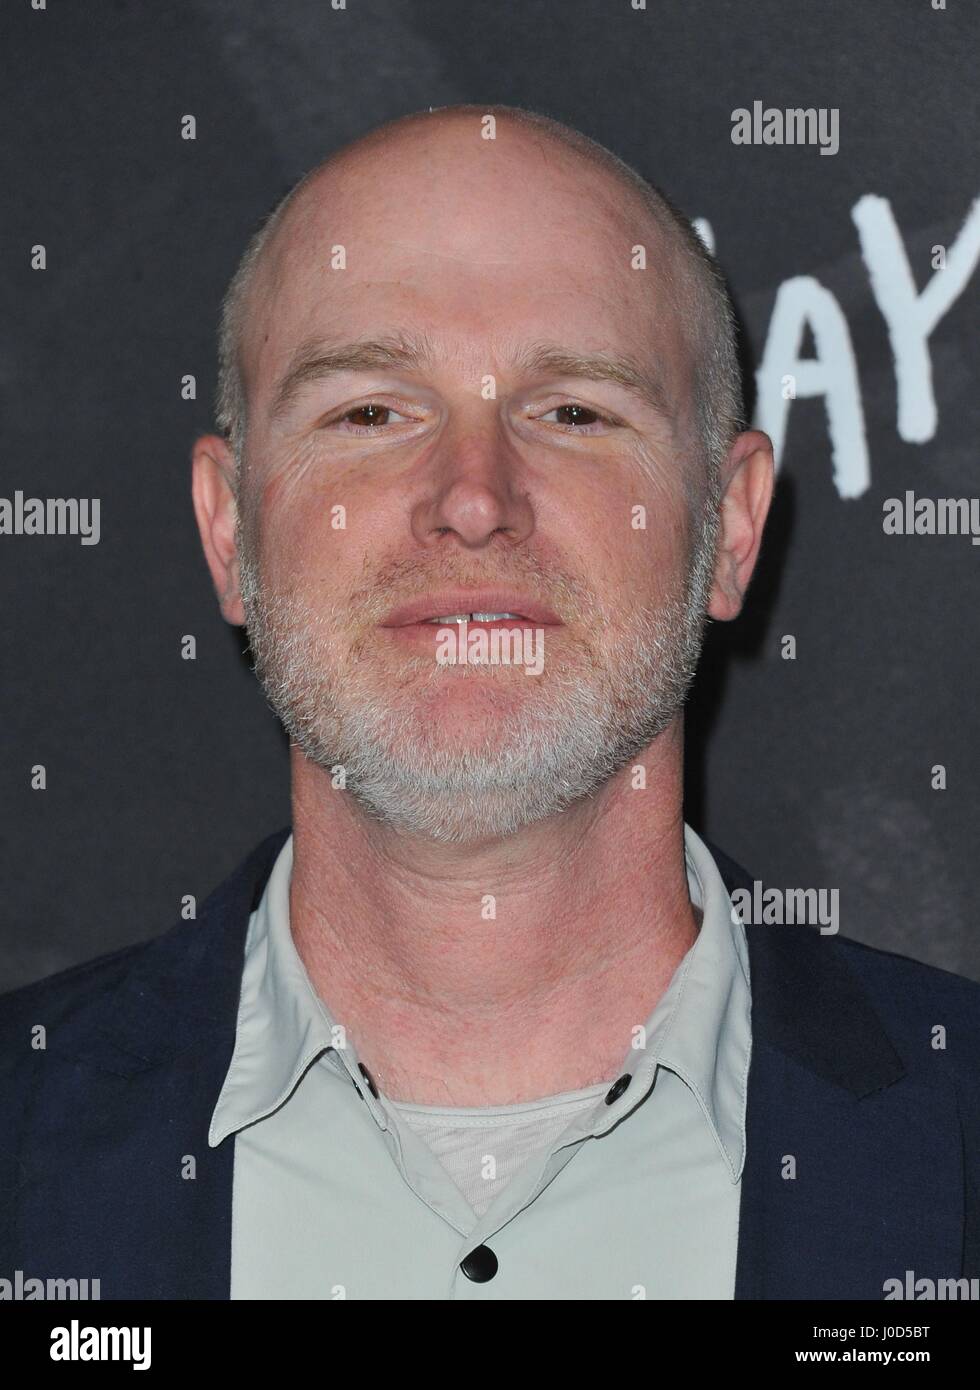 Los Angeles, California, USA. 11th Apr, 2017. David Hollander at arrivals for Showtime's RAY DONOVAN Season 4 FYC Event, DGA Theatre, Los Angeles, CA April 11, 2017. Credit: Dee Cercone/Everett Collection/Alamy Live News Stock Photo